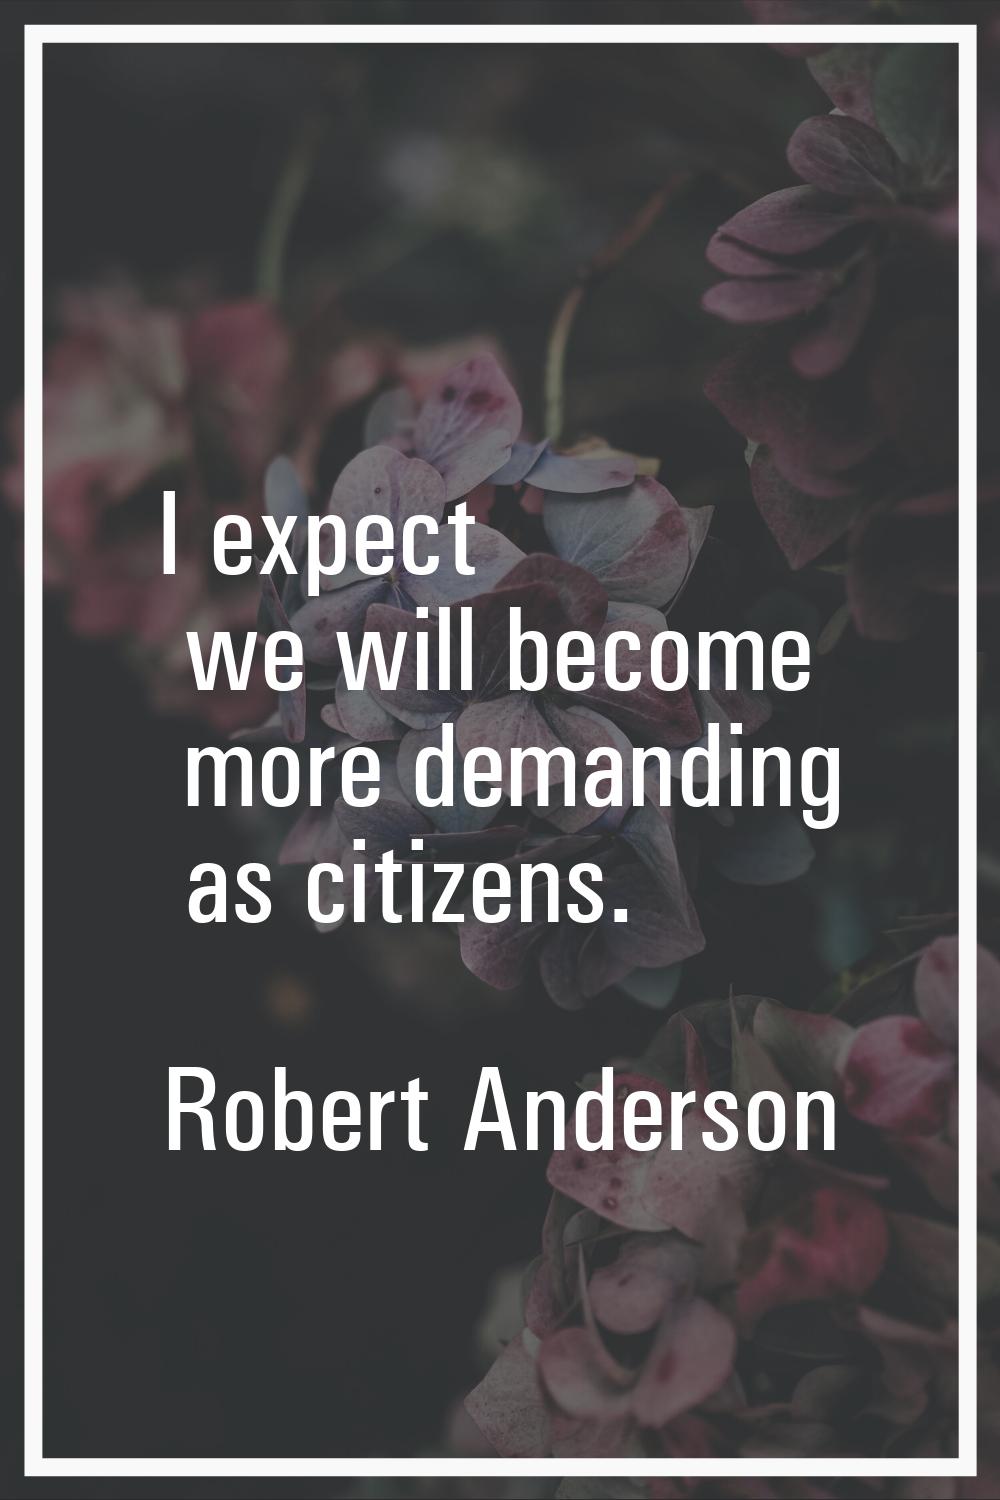 I expect we will become more demanding as citizens.